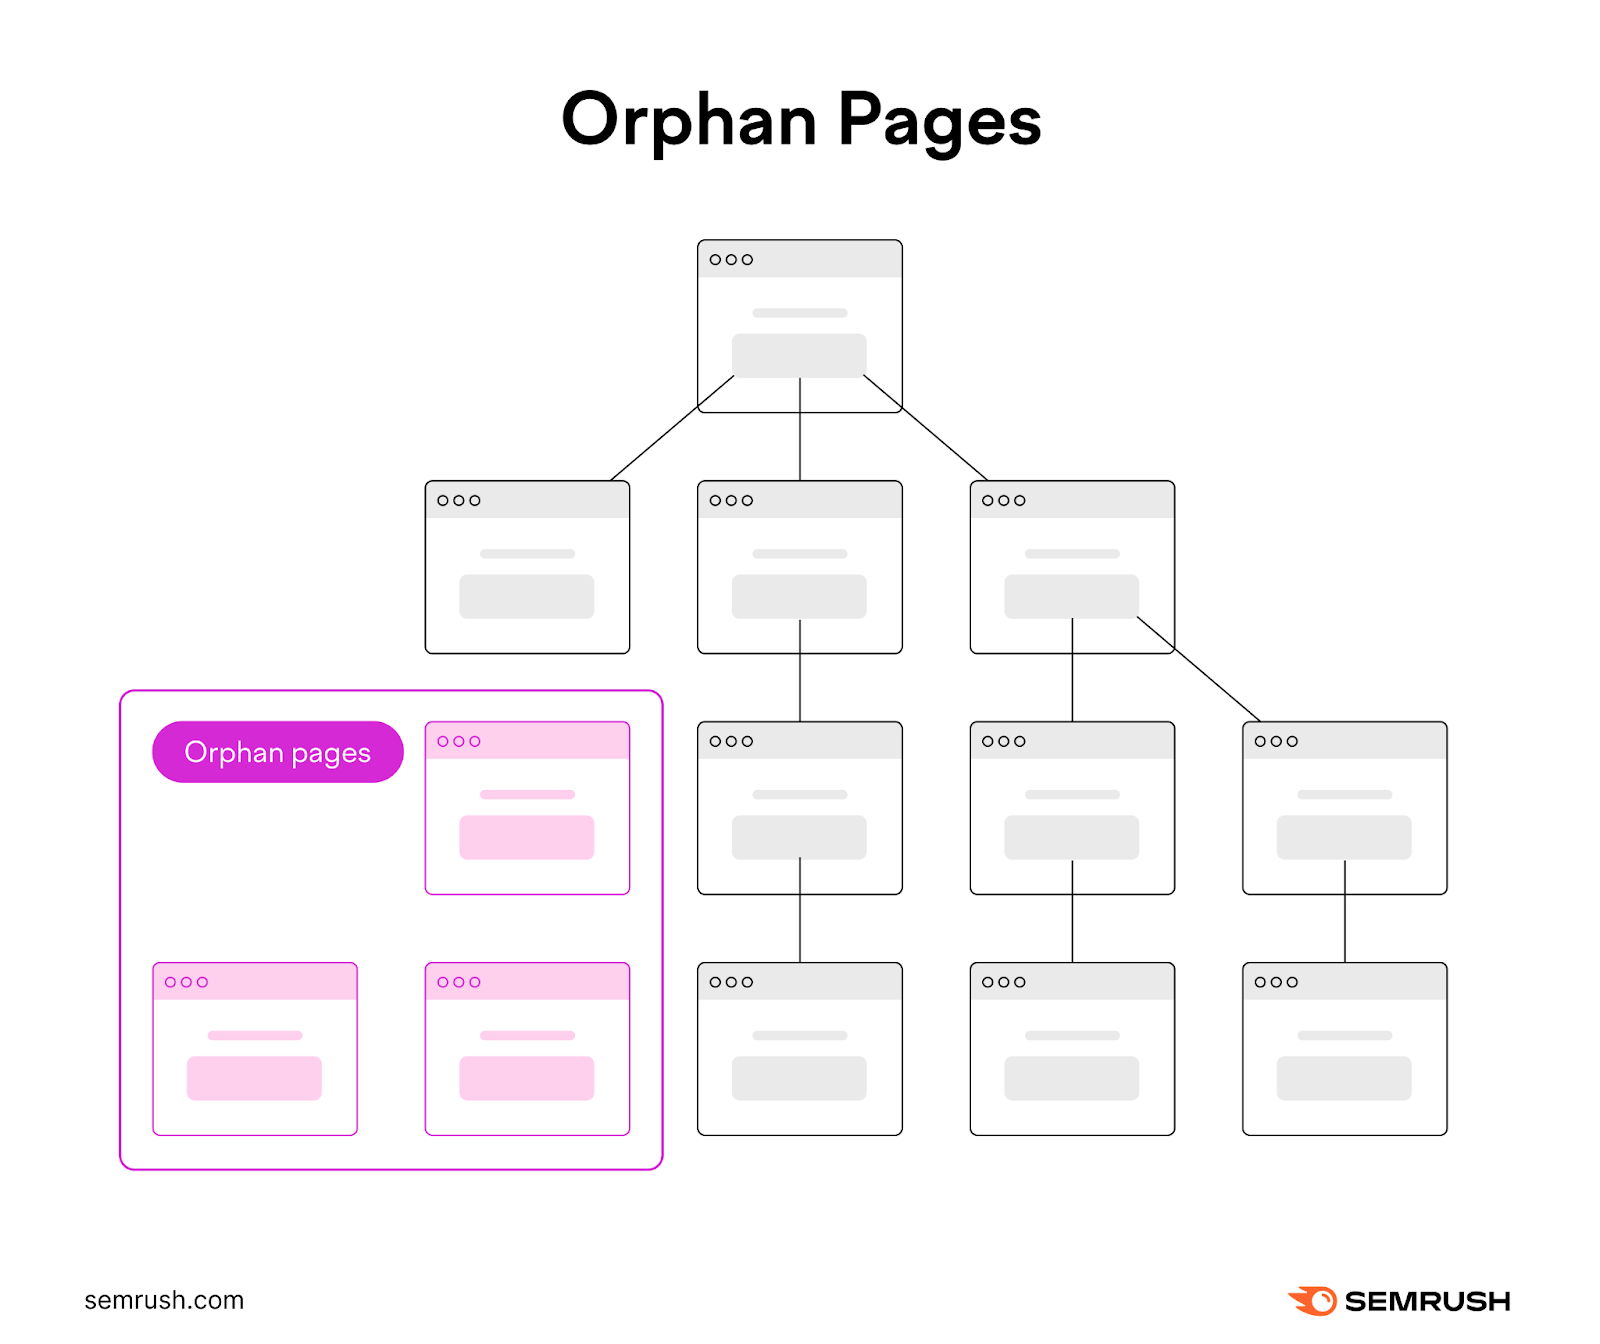 A ocular  practice   of orphan pages